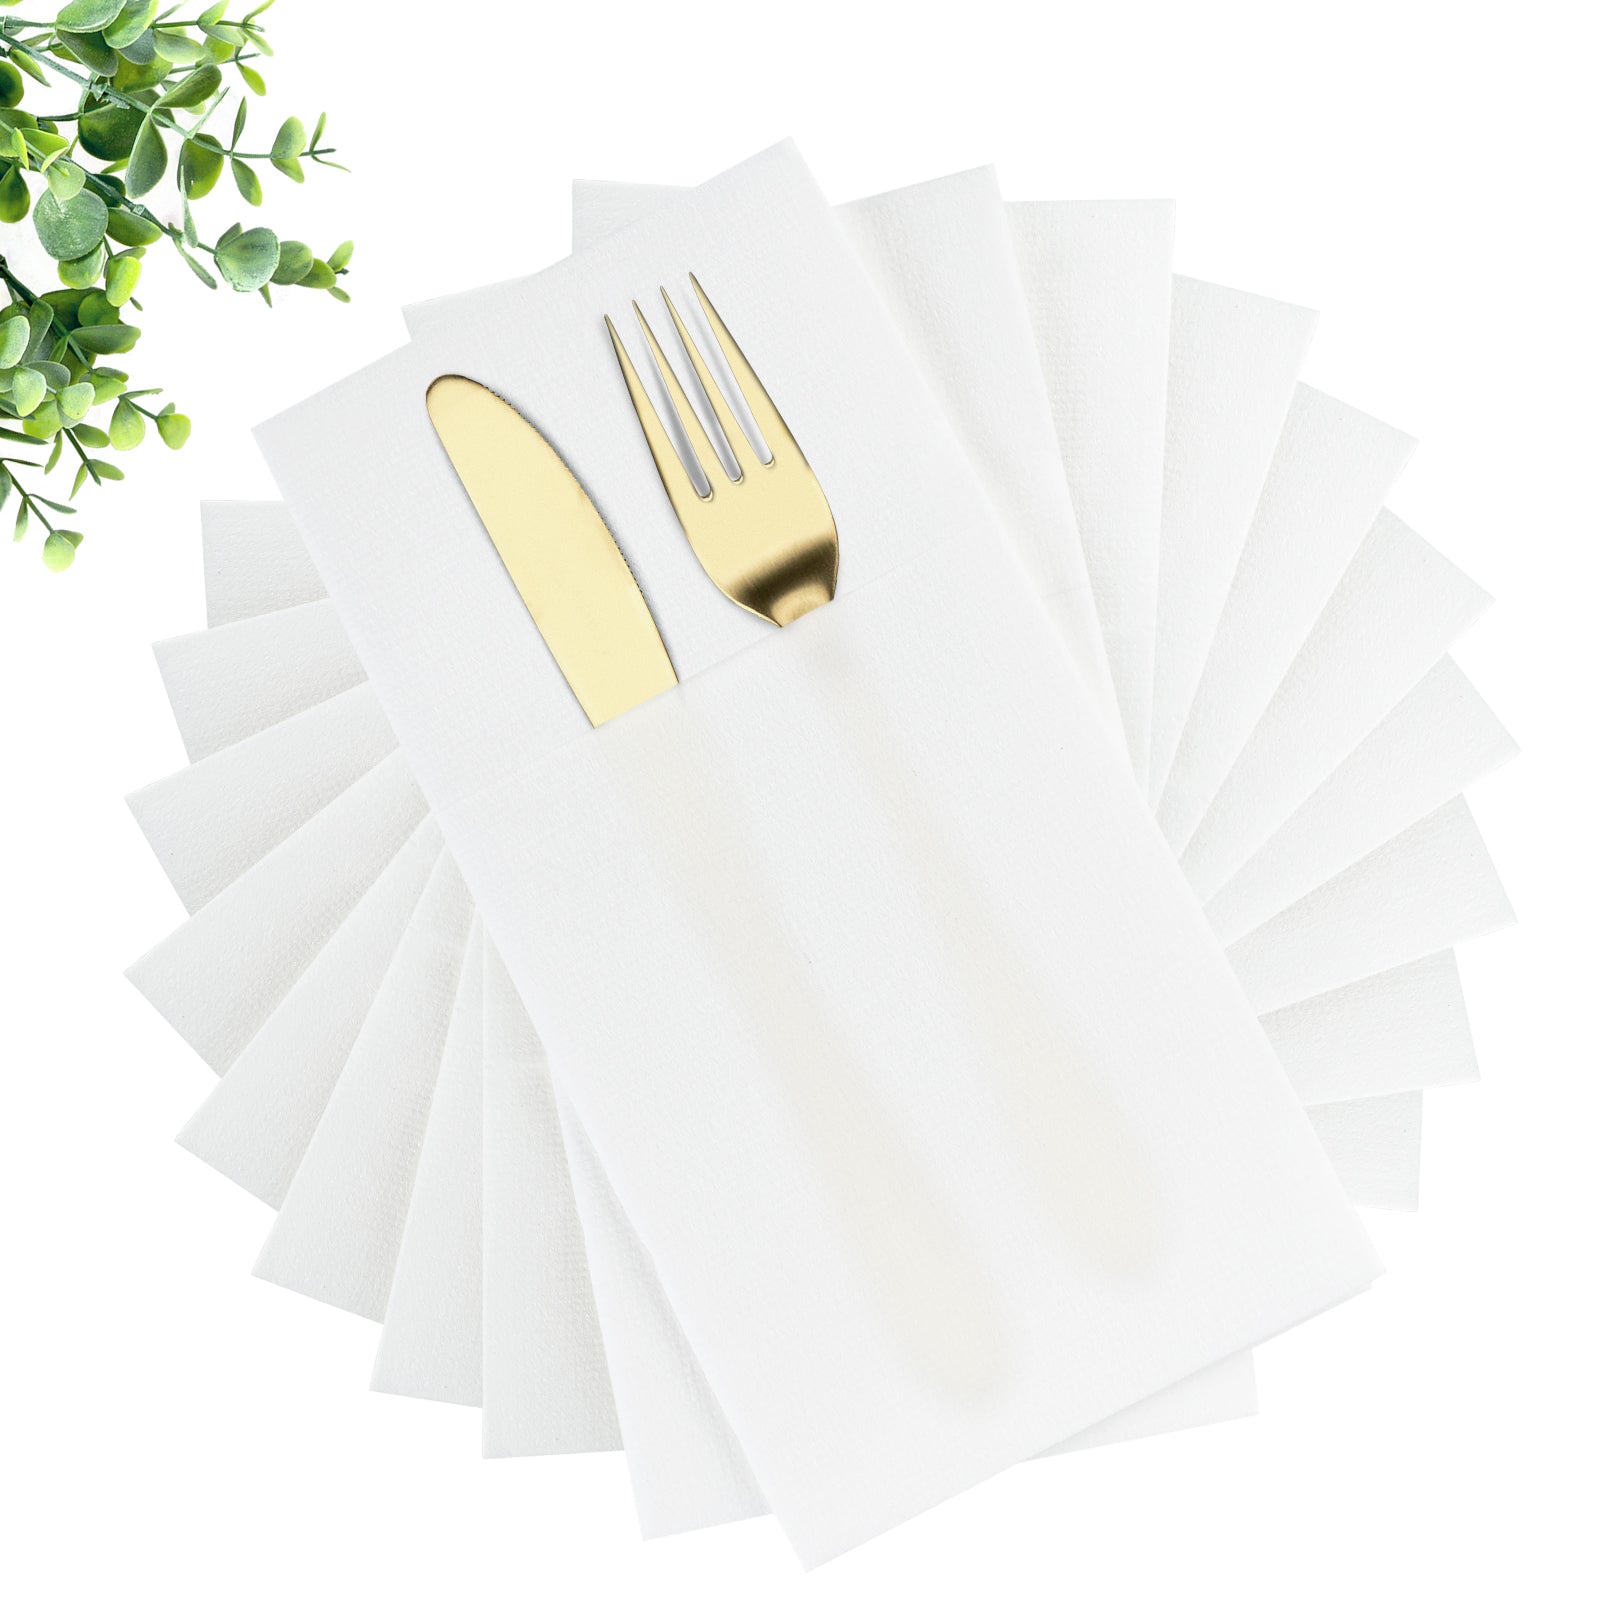 Disposable Linen-Feel Napkins, Cloth Like Napkins with Built-in Flatware Pocket, 50Pcs White Dinner Napkins Disposable Paper Hand Towels for Bathroom, Wedding, Party